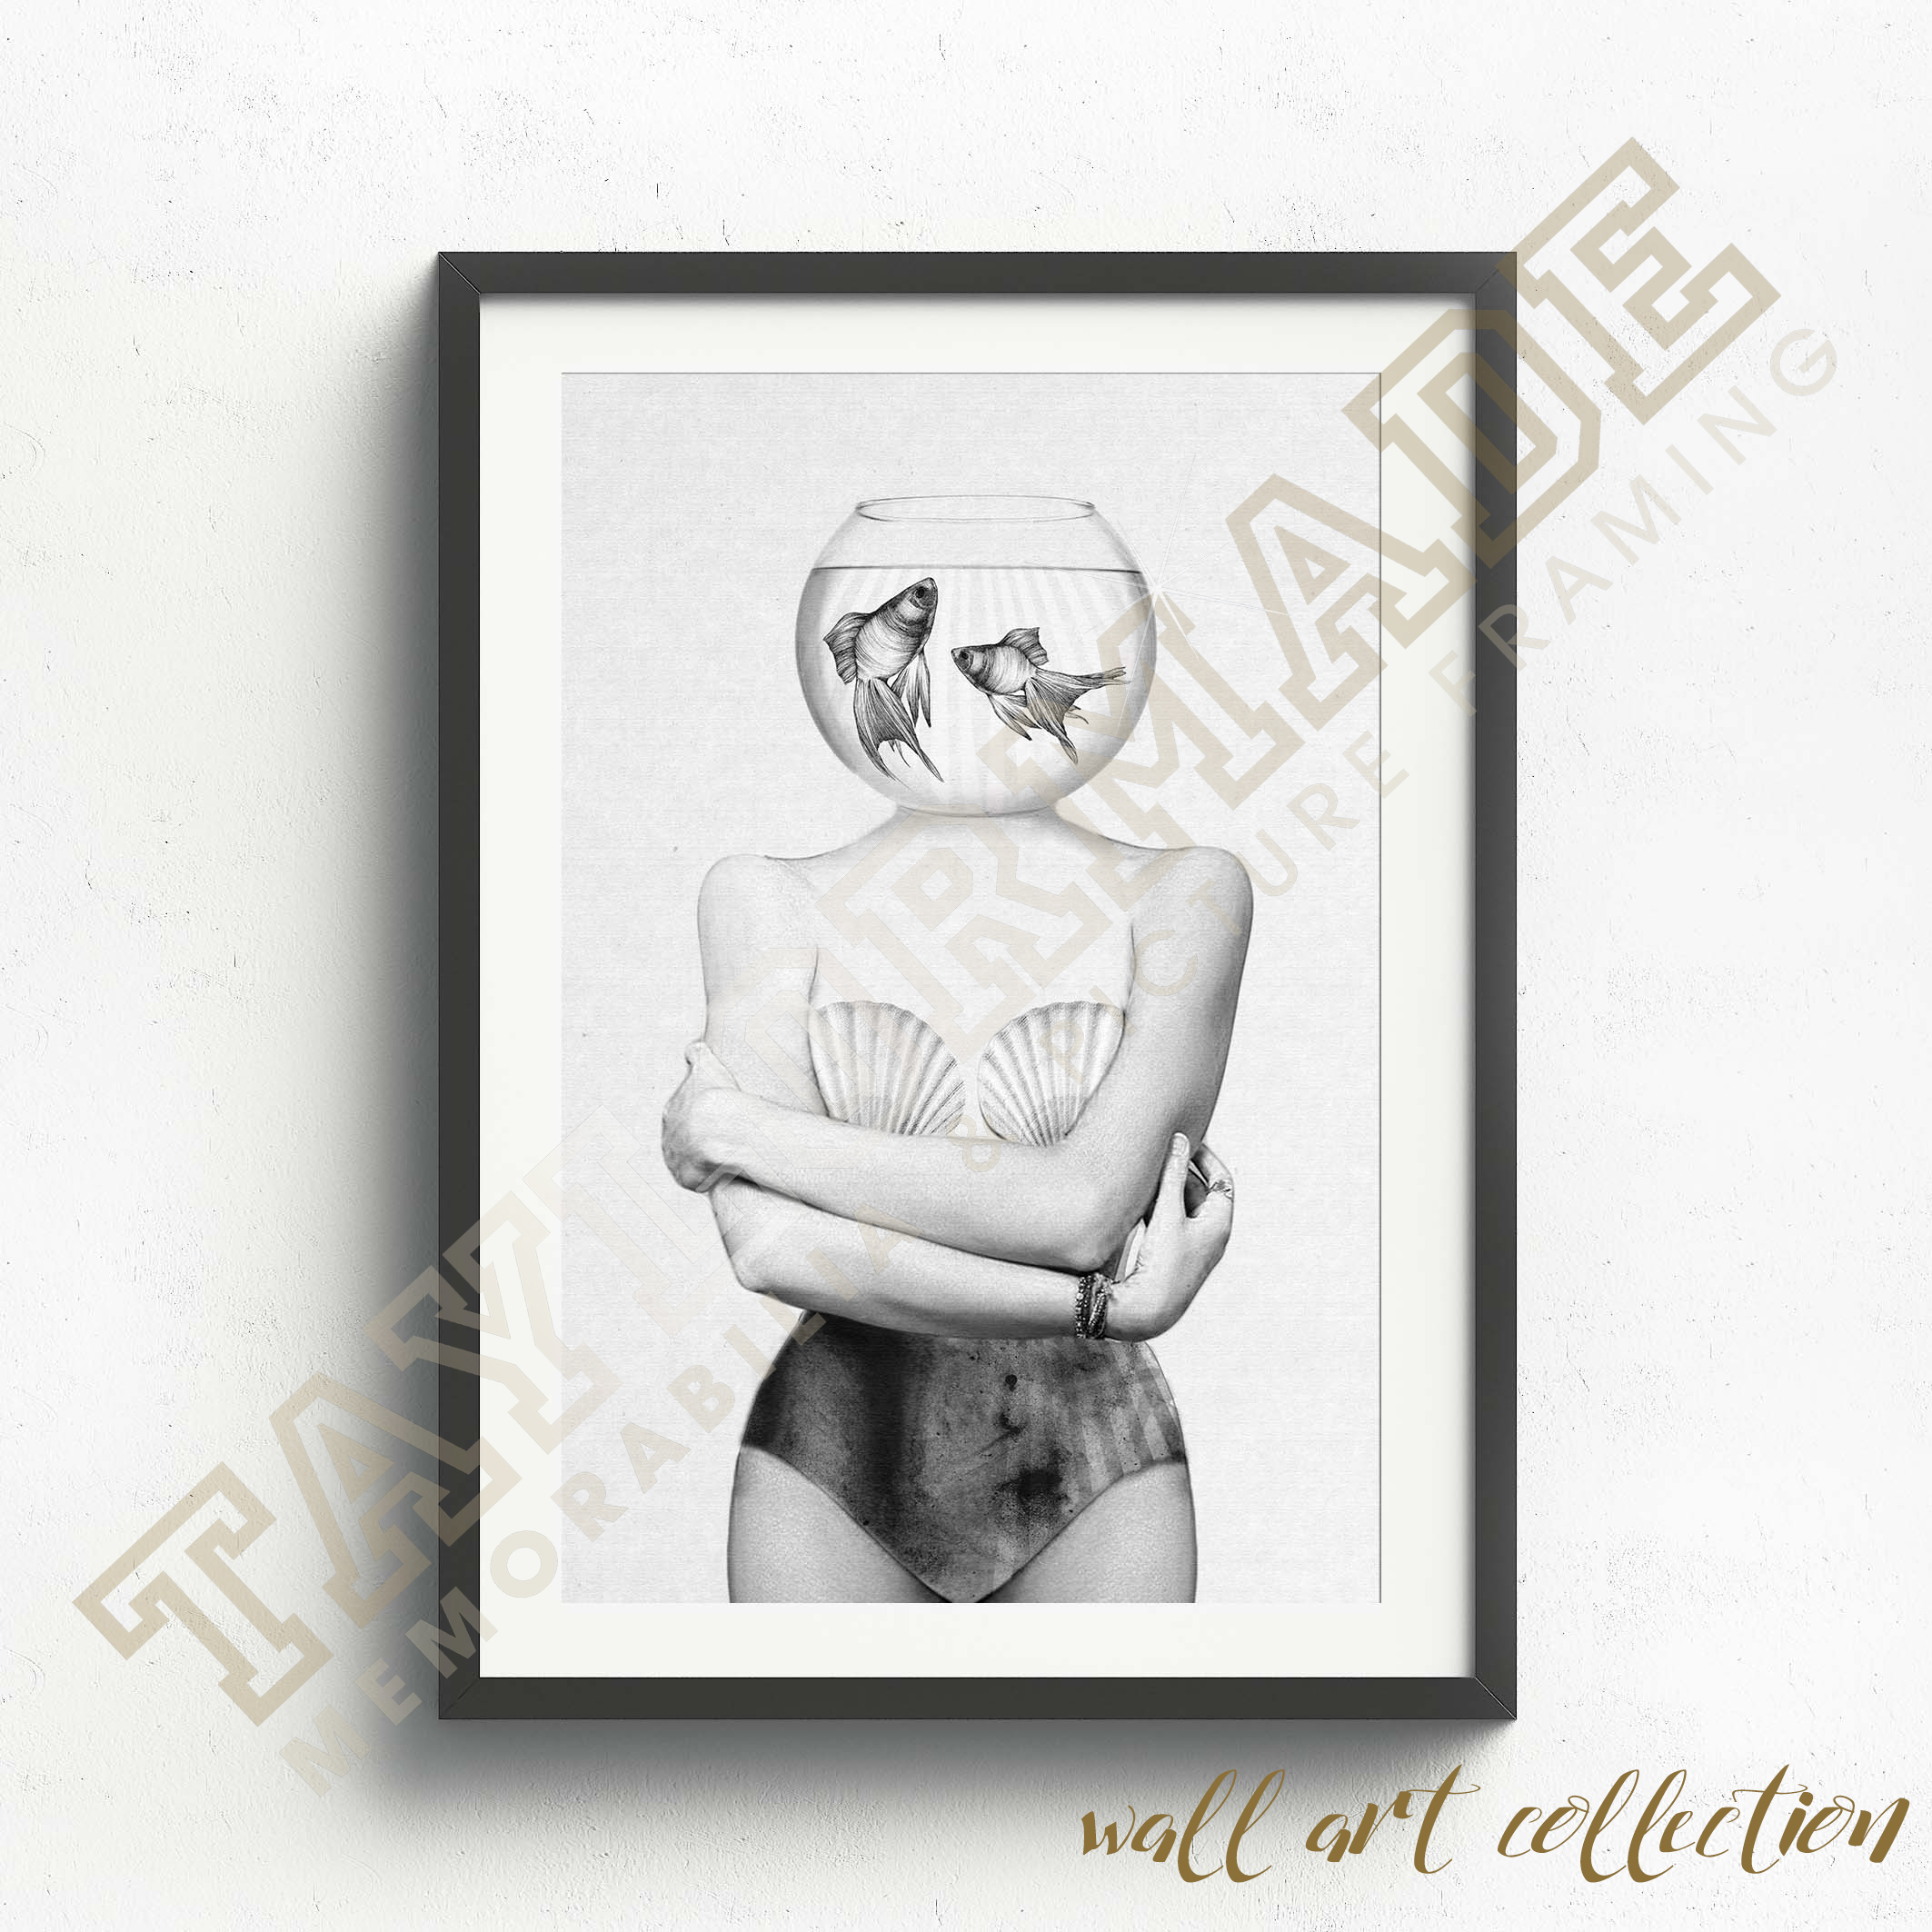 Wall Art Collection – Pieces